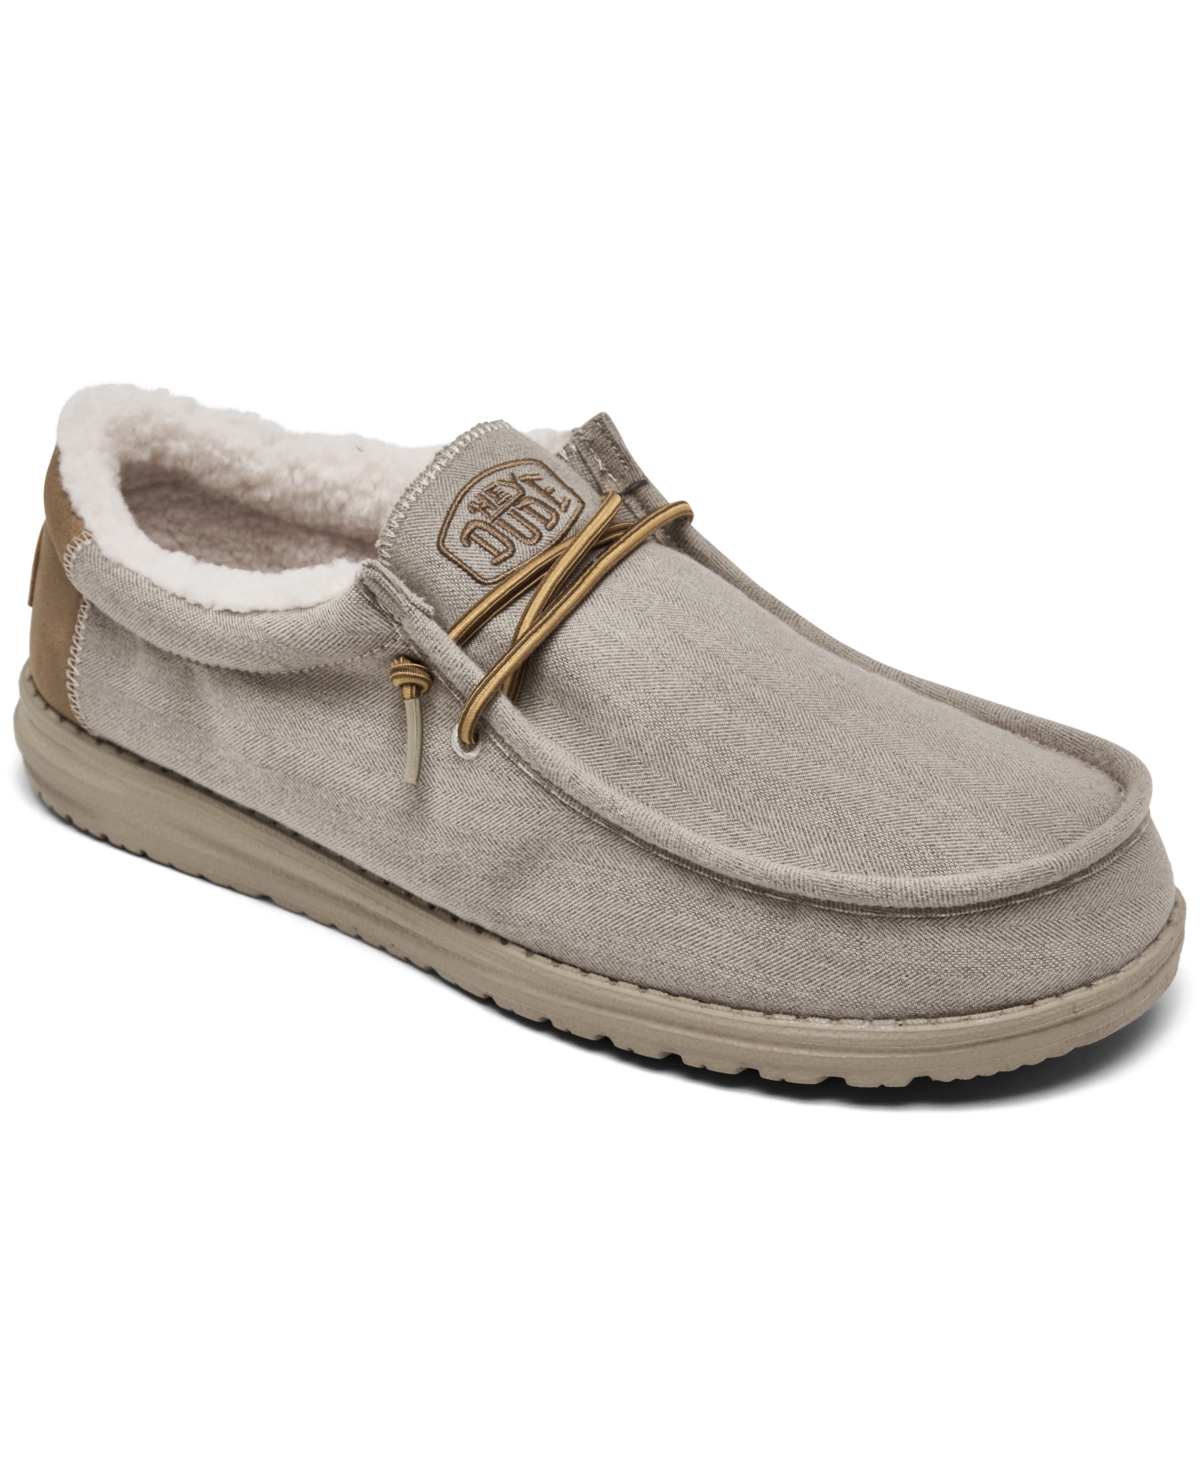 Men's Wally Herringbone Faux Sherpa Casual Moccasin Sneakers from Finish Line - Light Gray